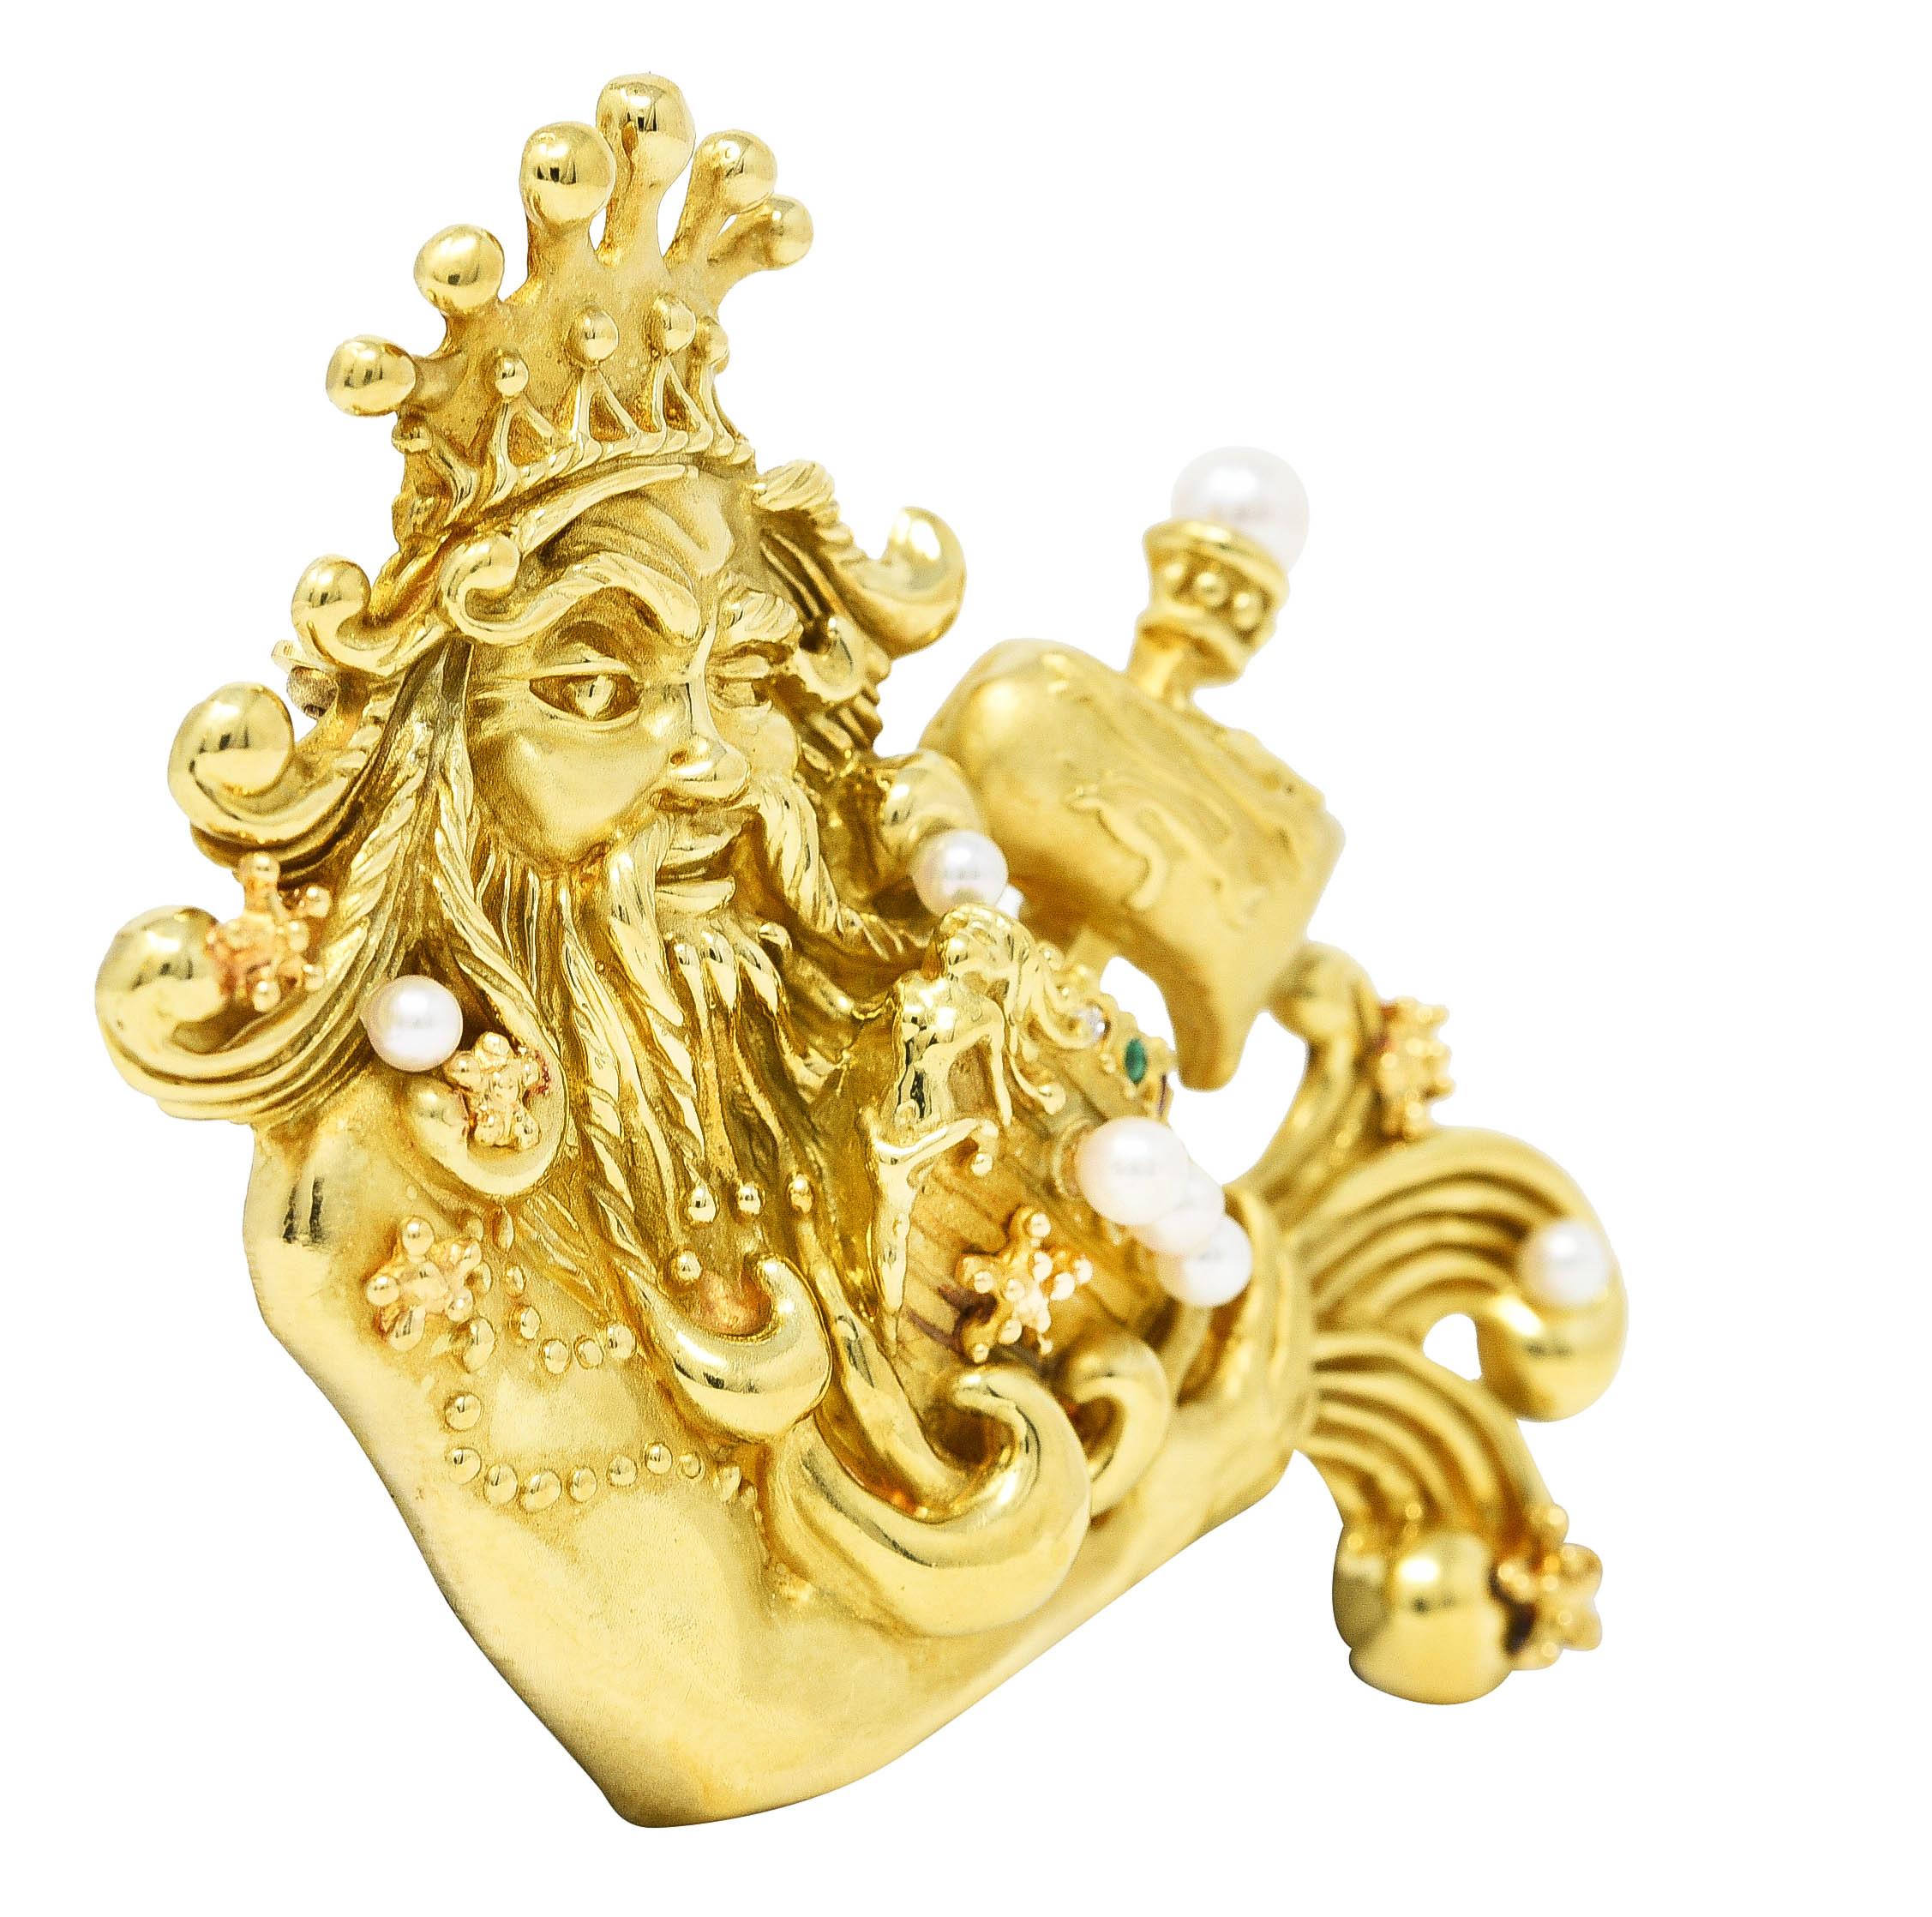 Designed as a highly rendered Poseidon wearing a crown and holding a ship among the waves
Grooved with texturous hair and gold beaded detailing - boat sails feature dragon motif. Accented by a round cut diamond, emerald, ruby, and sapphire on ship.